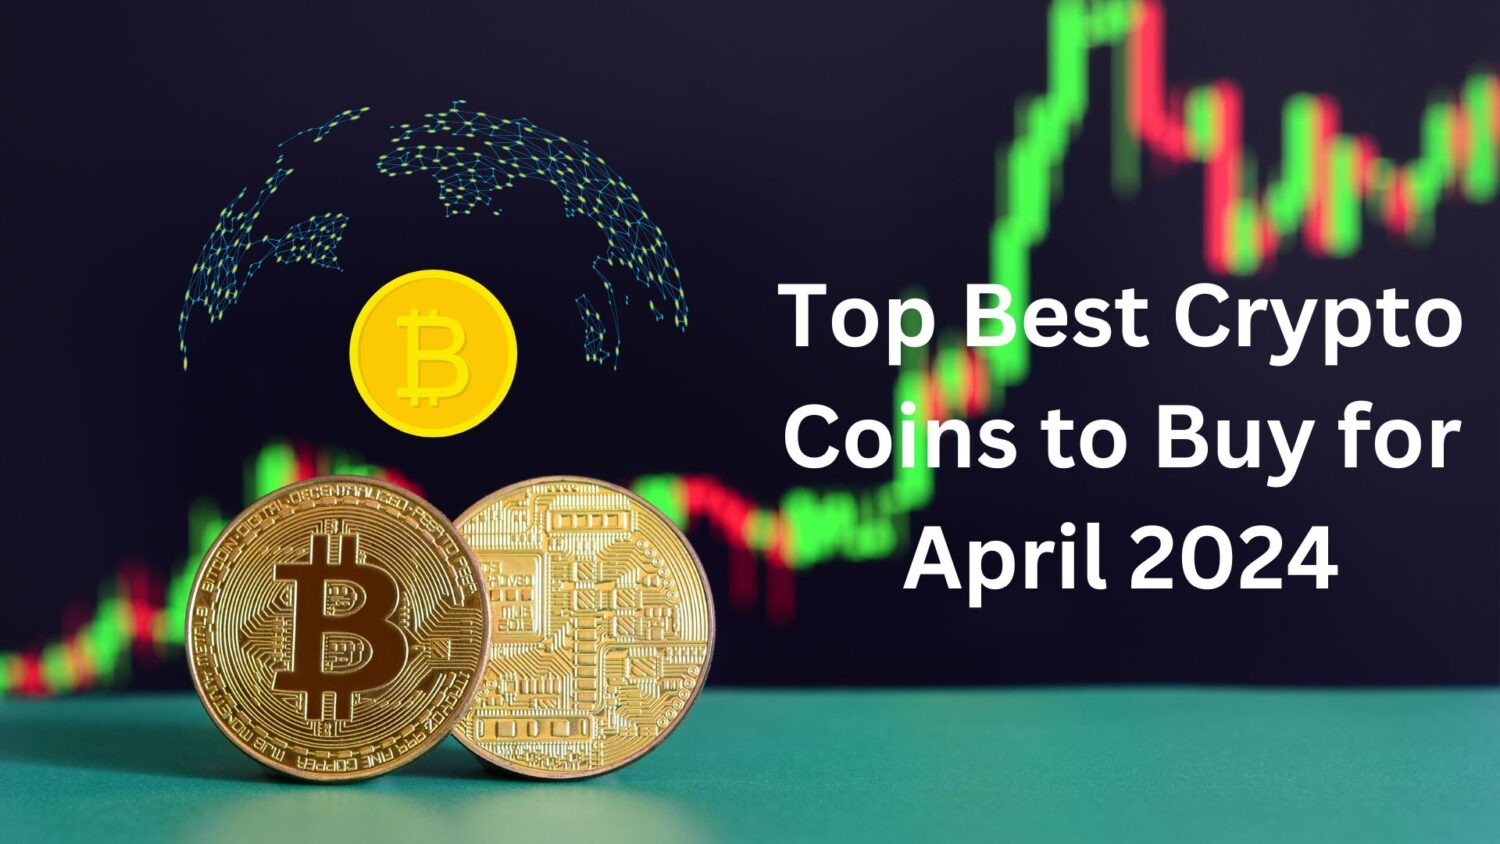 Top Best Crypto Coins To Buy For April 2024